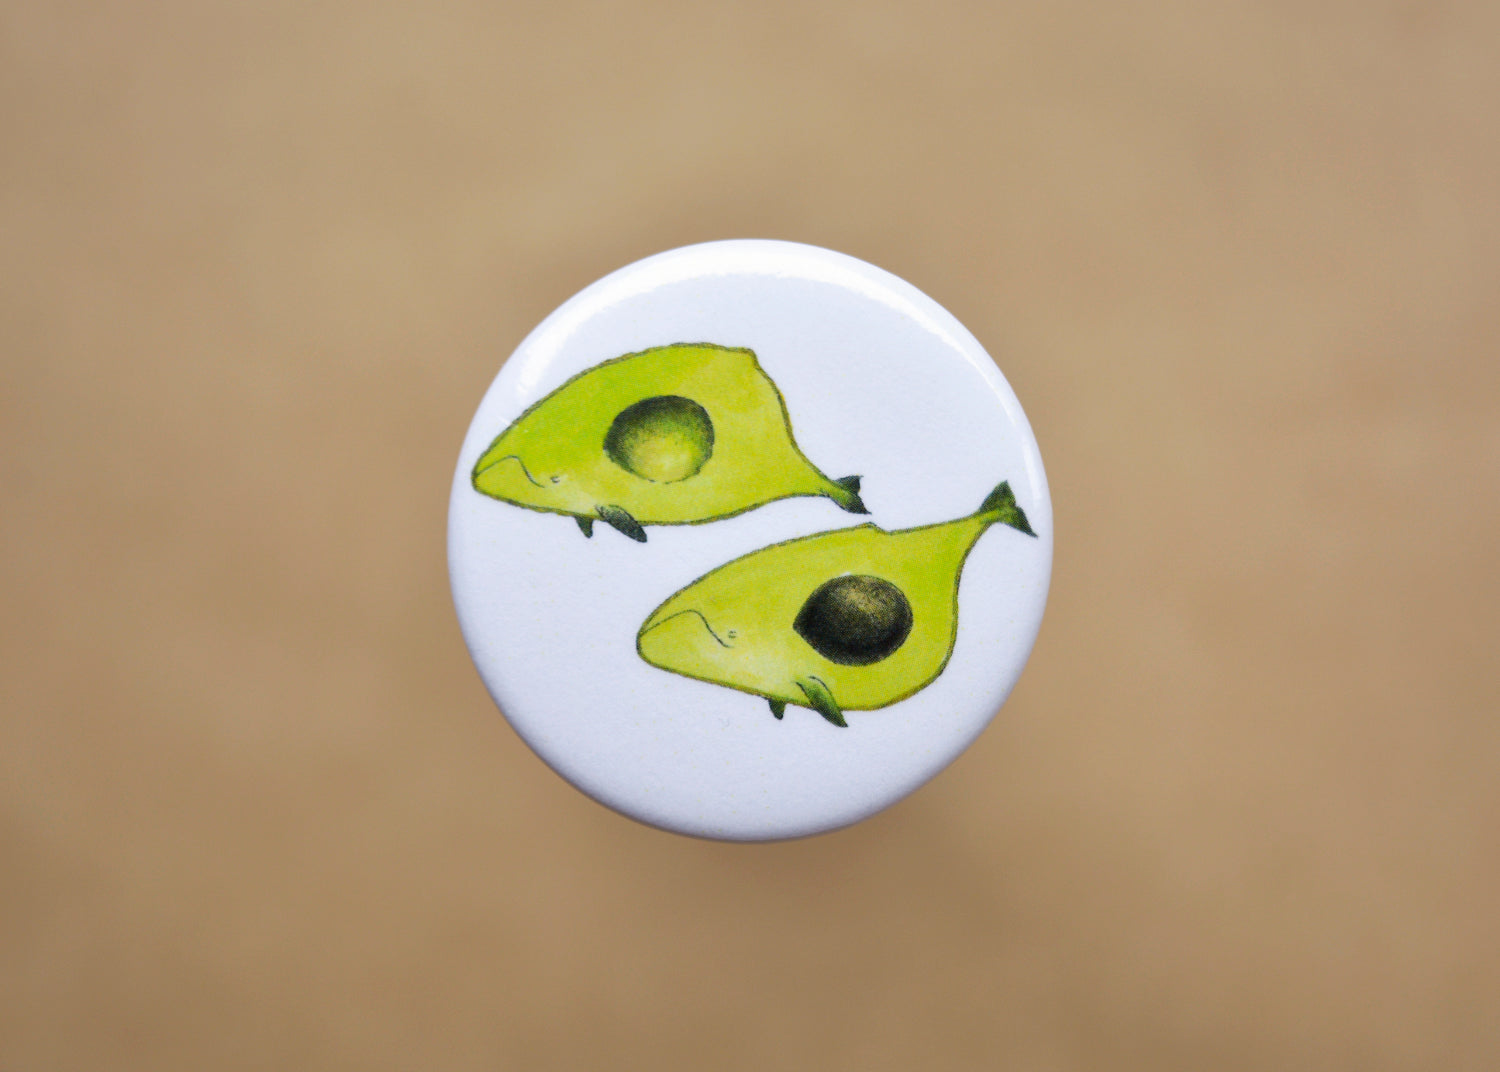 Pin back button with two imaginative "Avocado whales".